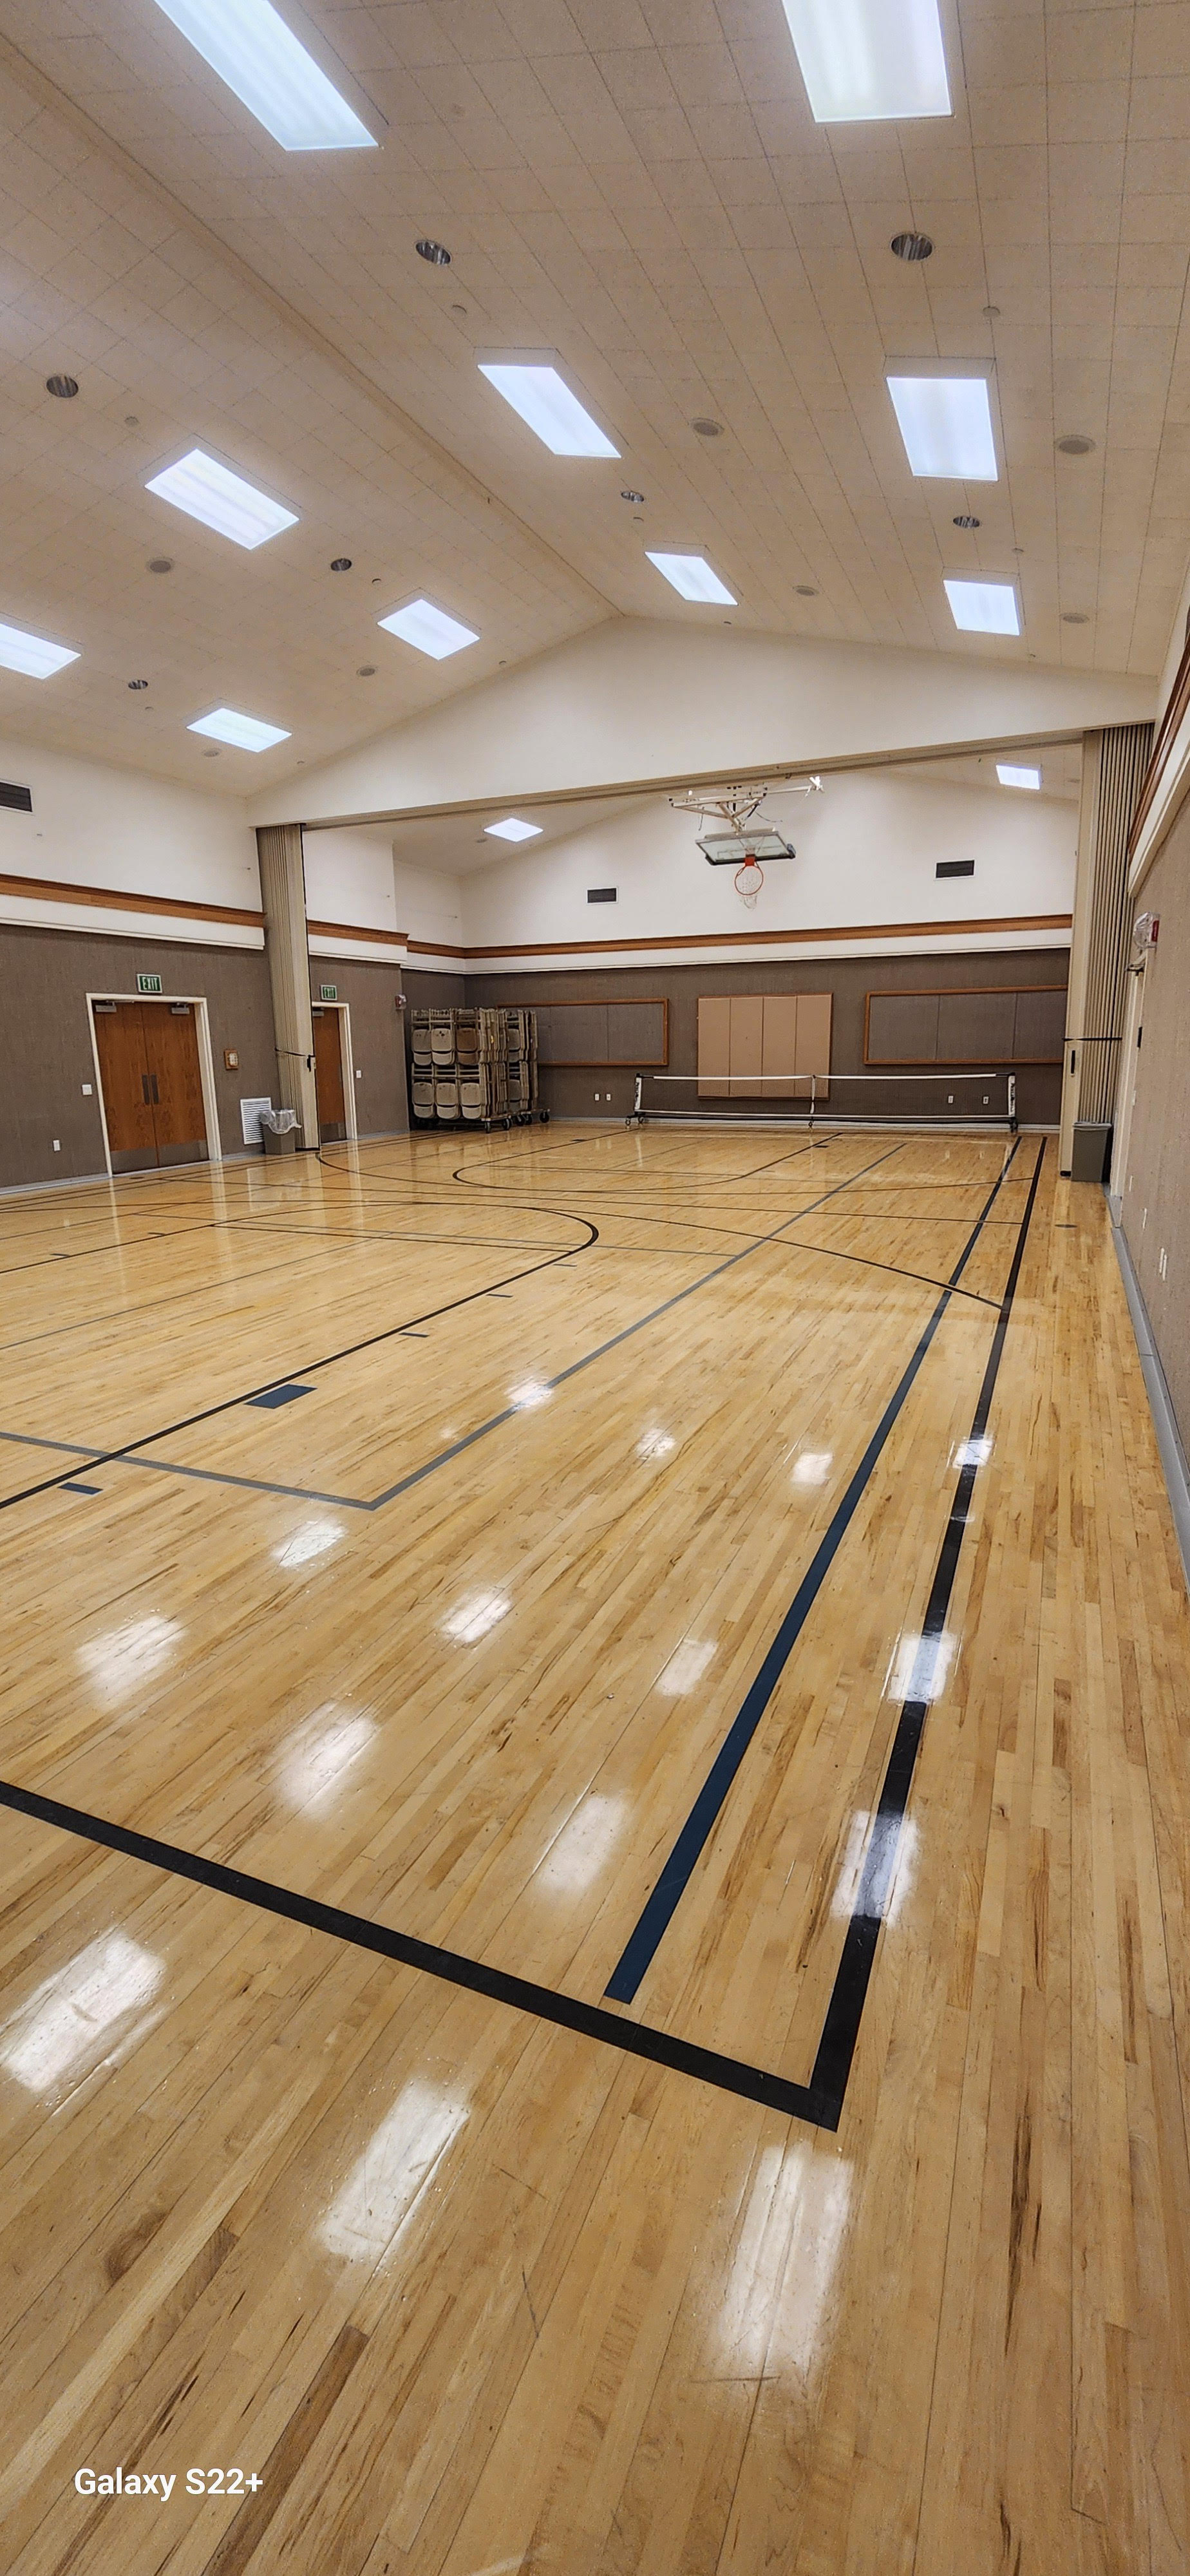 Each chapel has a gym to use for sports,  and other gatherings.